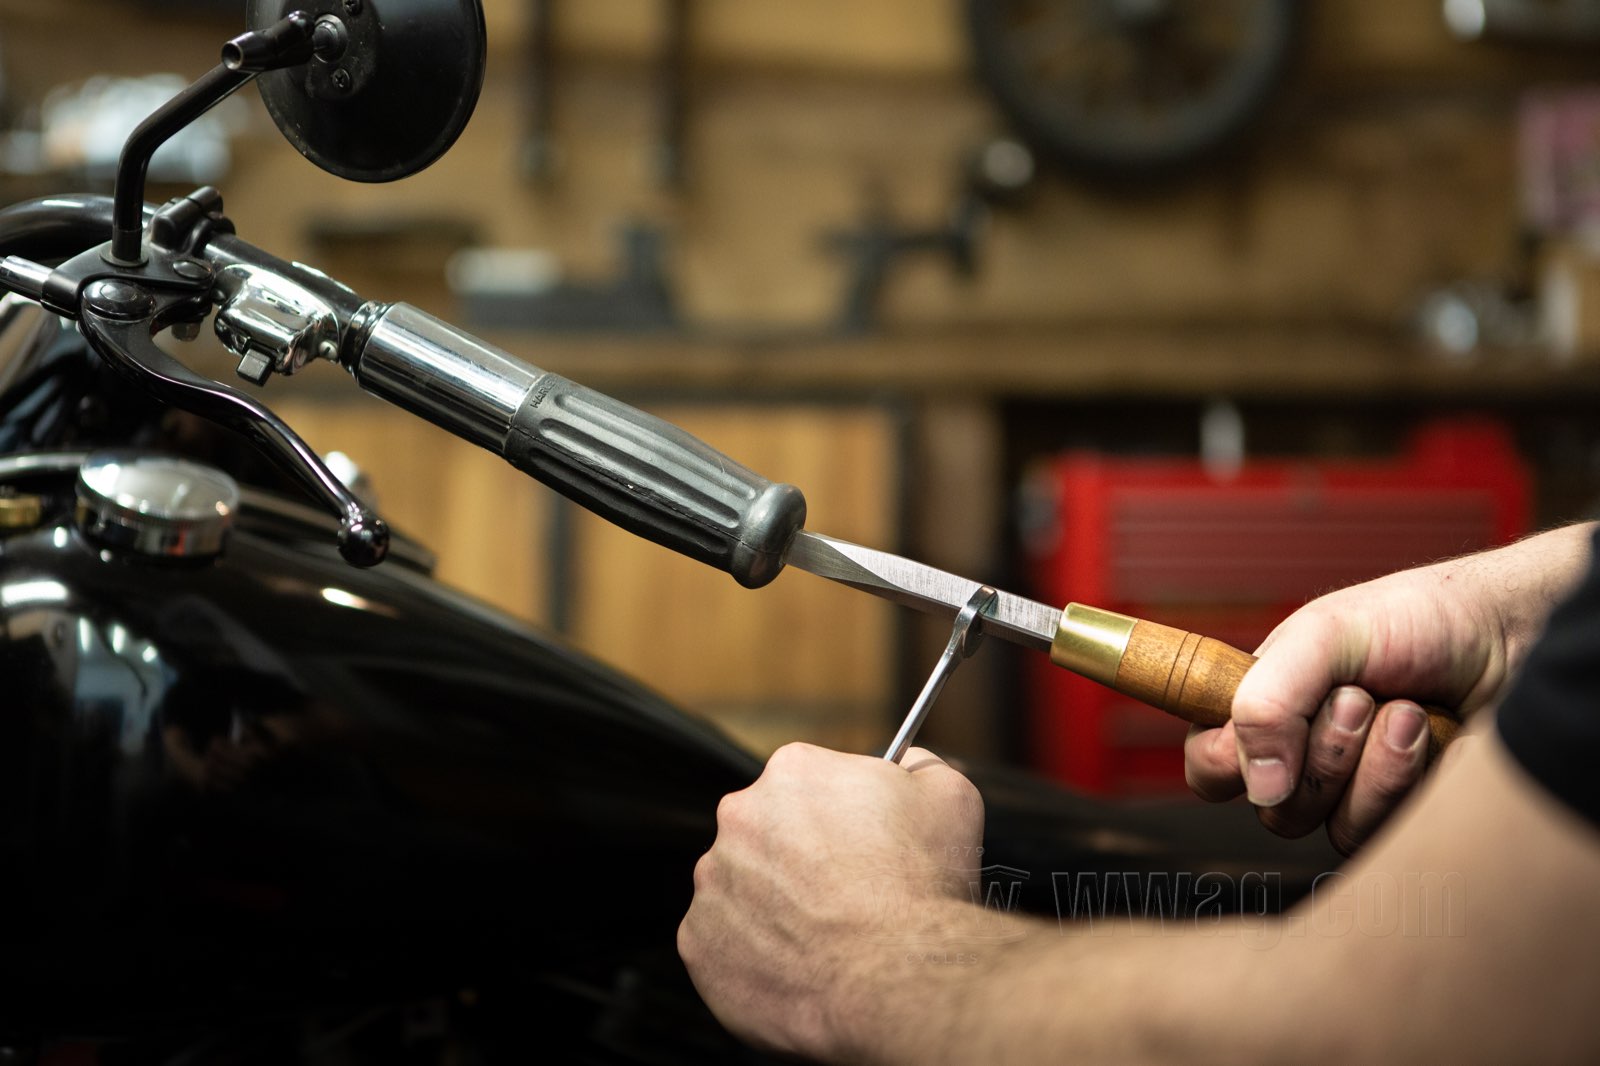 The Cyclery Screwdrivers for Handlebar End Plugs